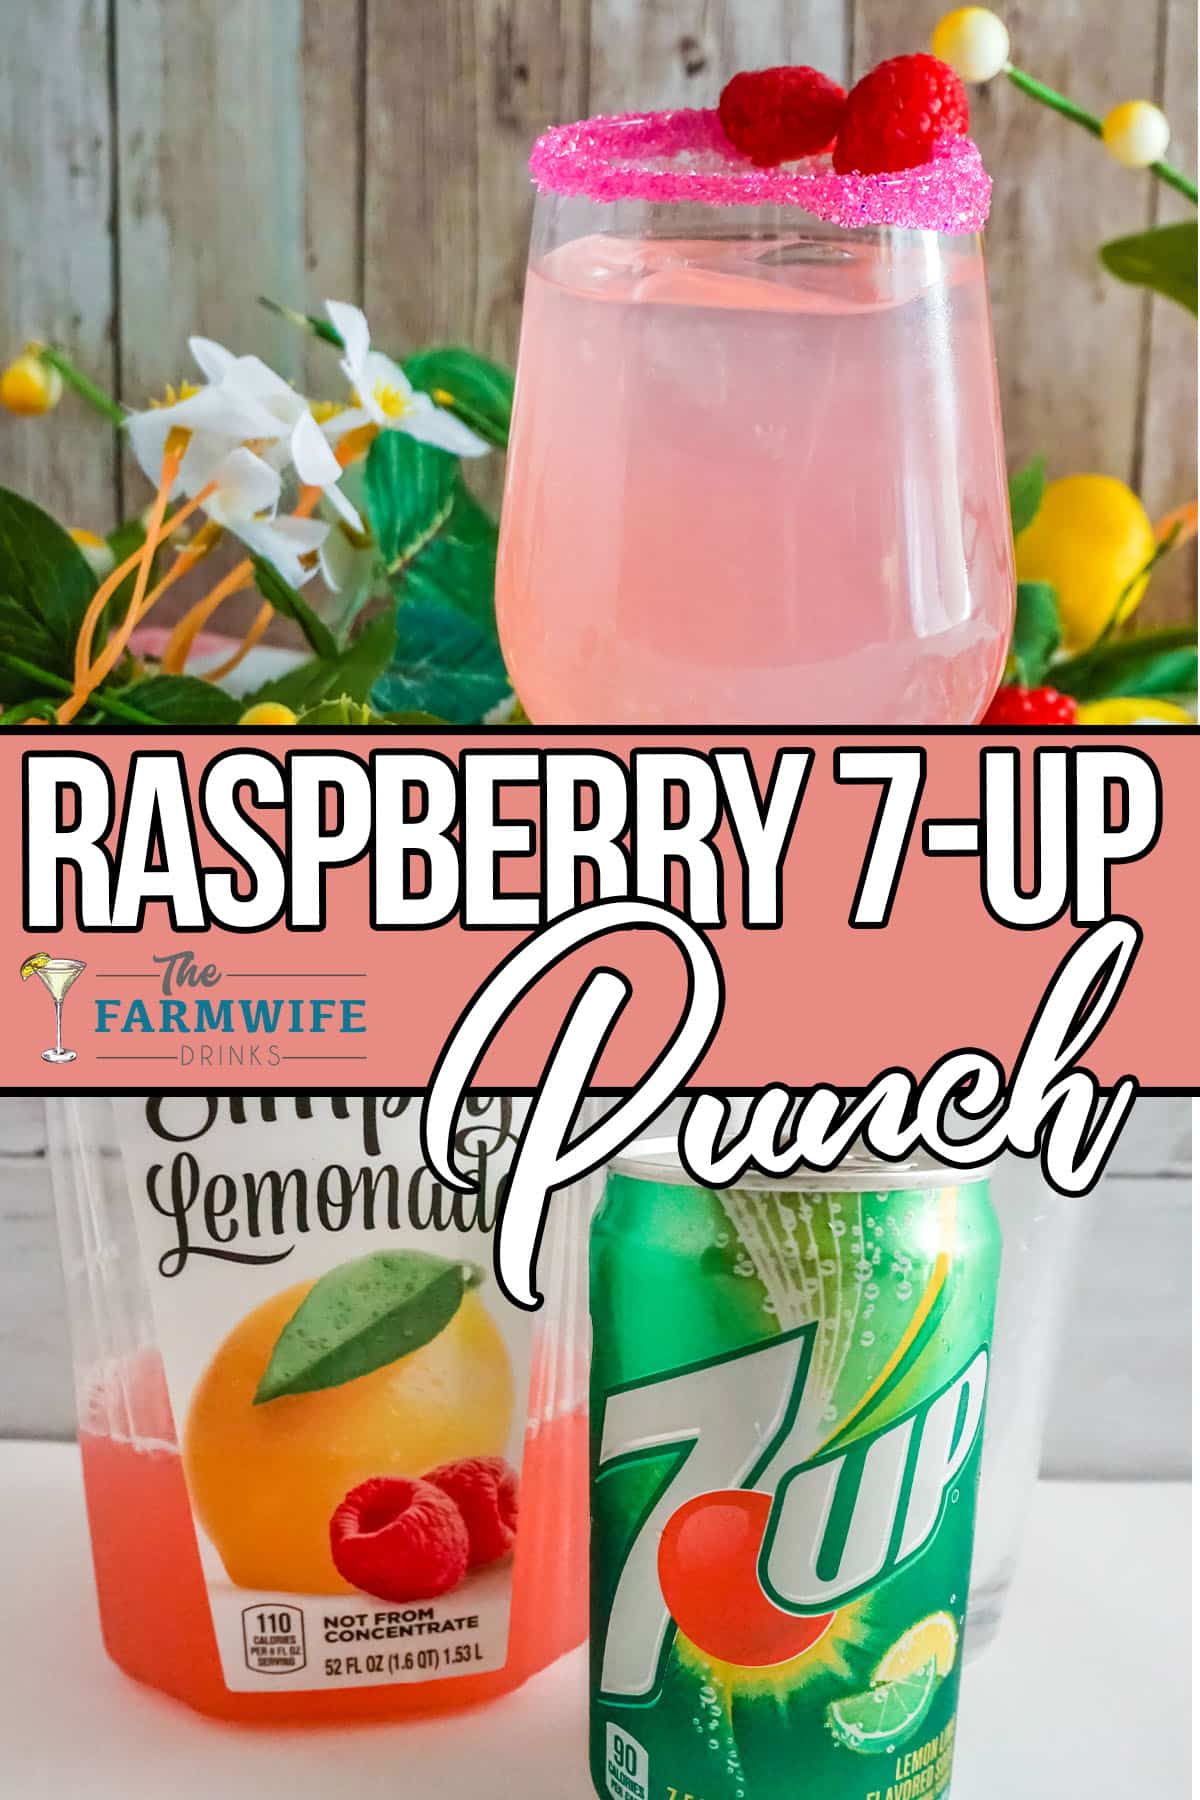 2 simple Ingredients for the Raspberry 7up Punch.